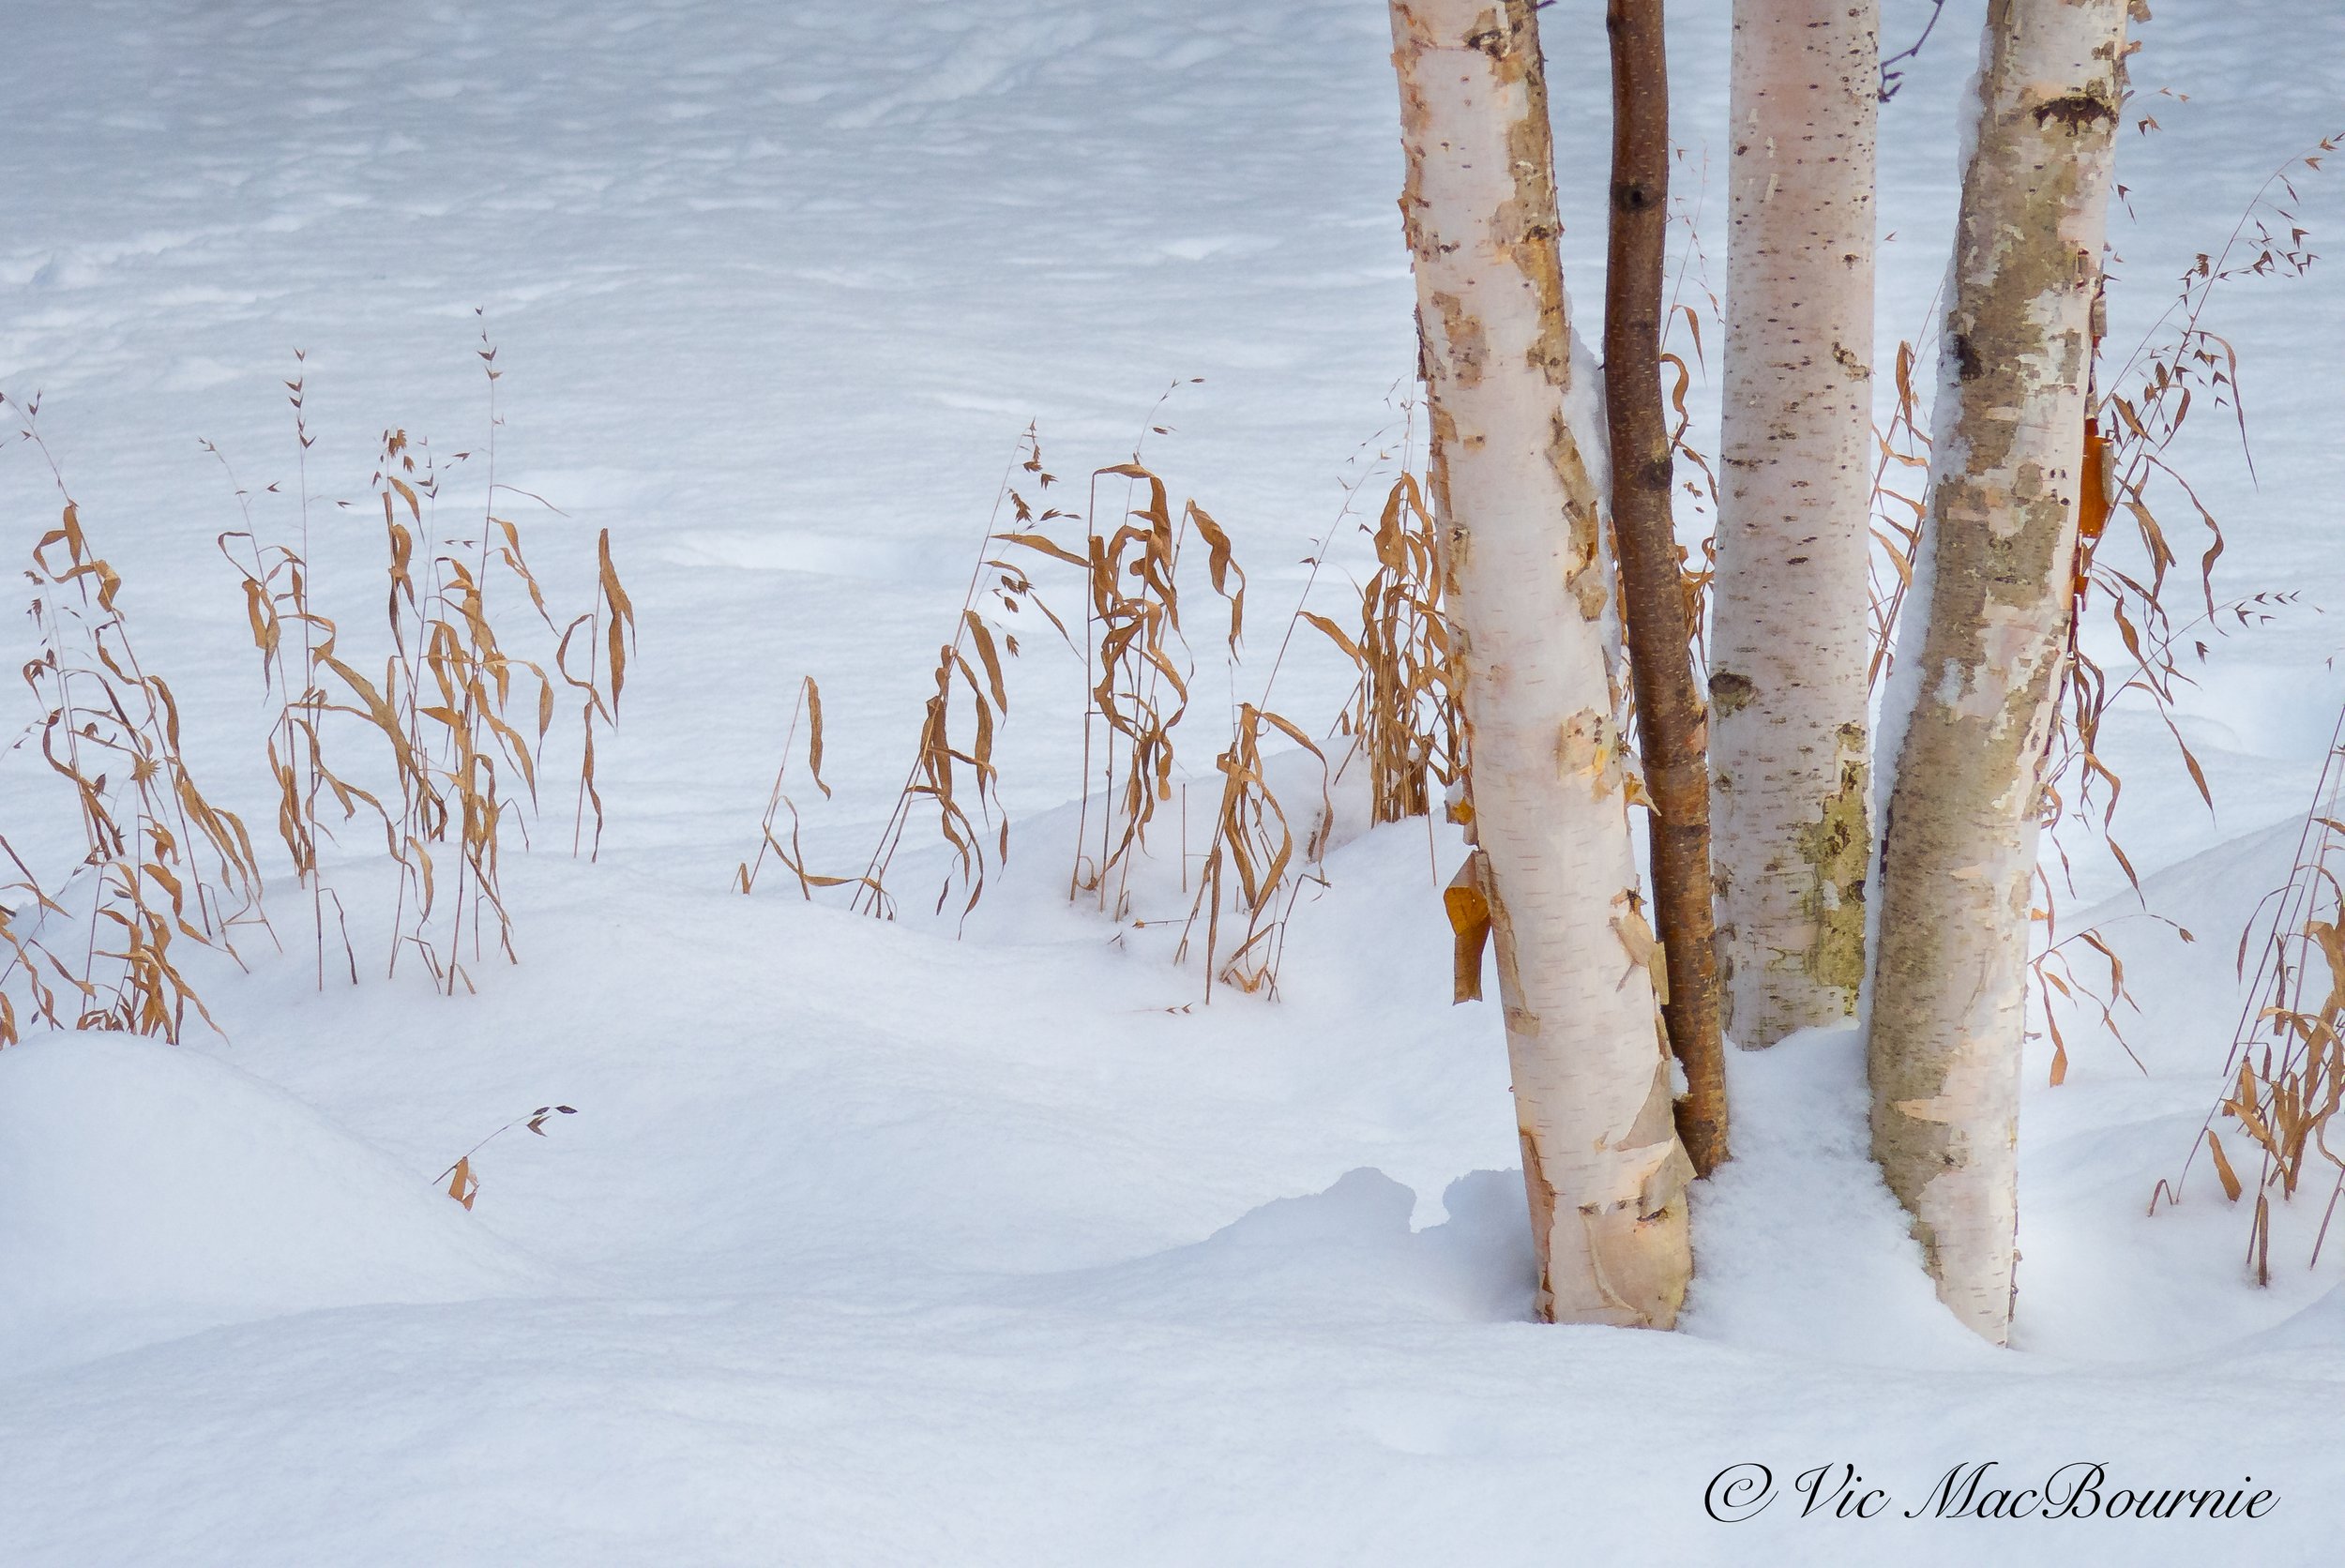 ch tree and grasses in snow with Pentax Q 06 lens